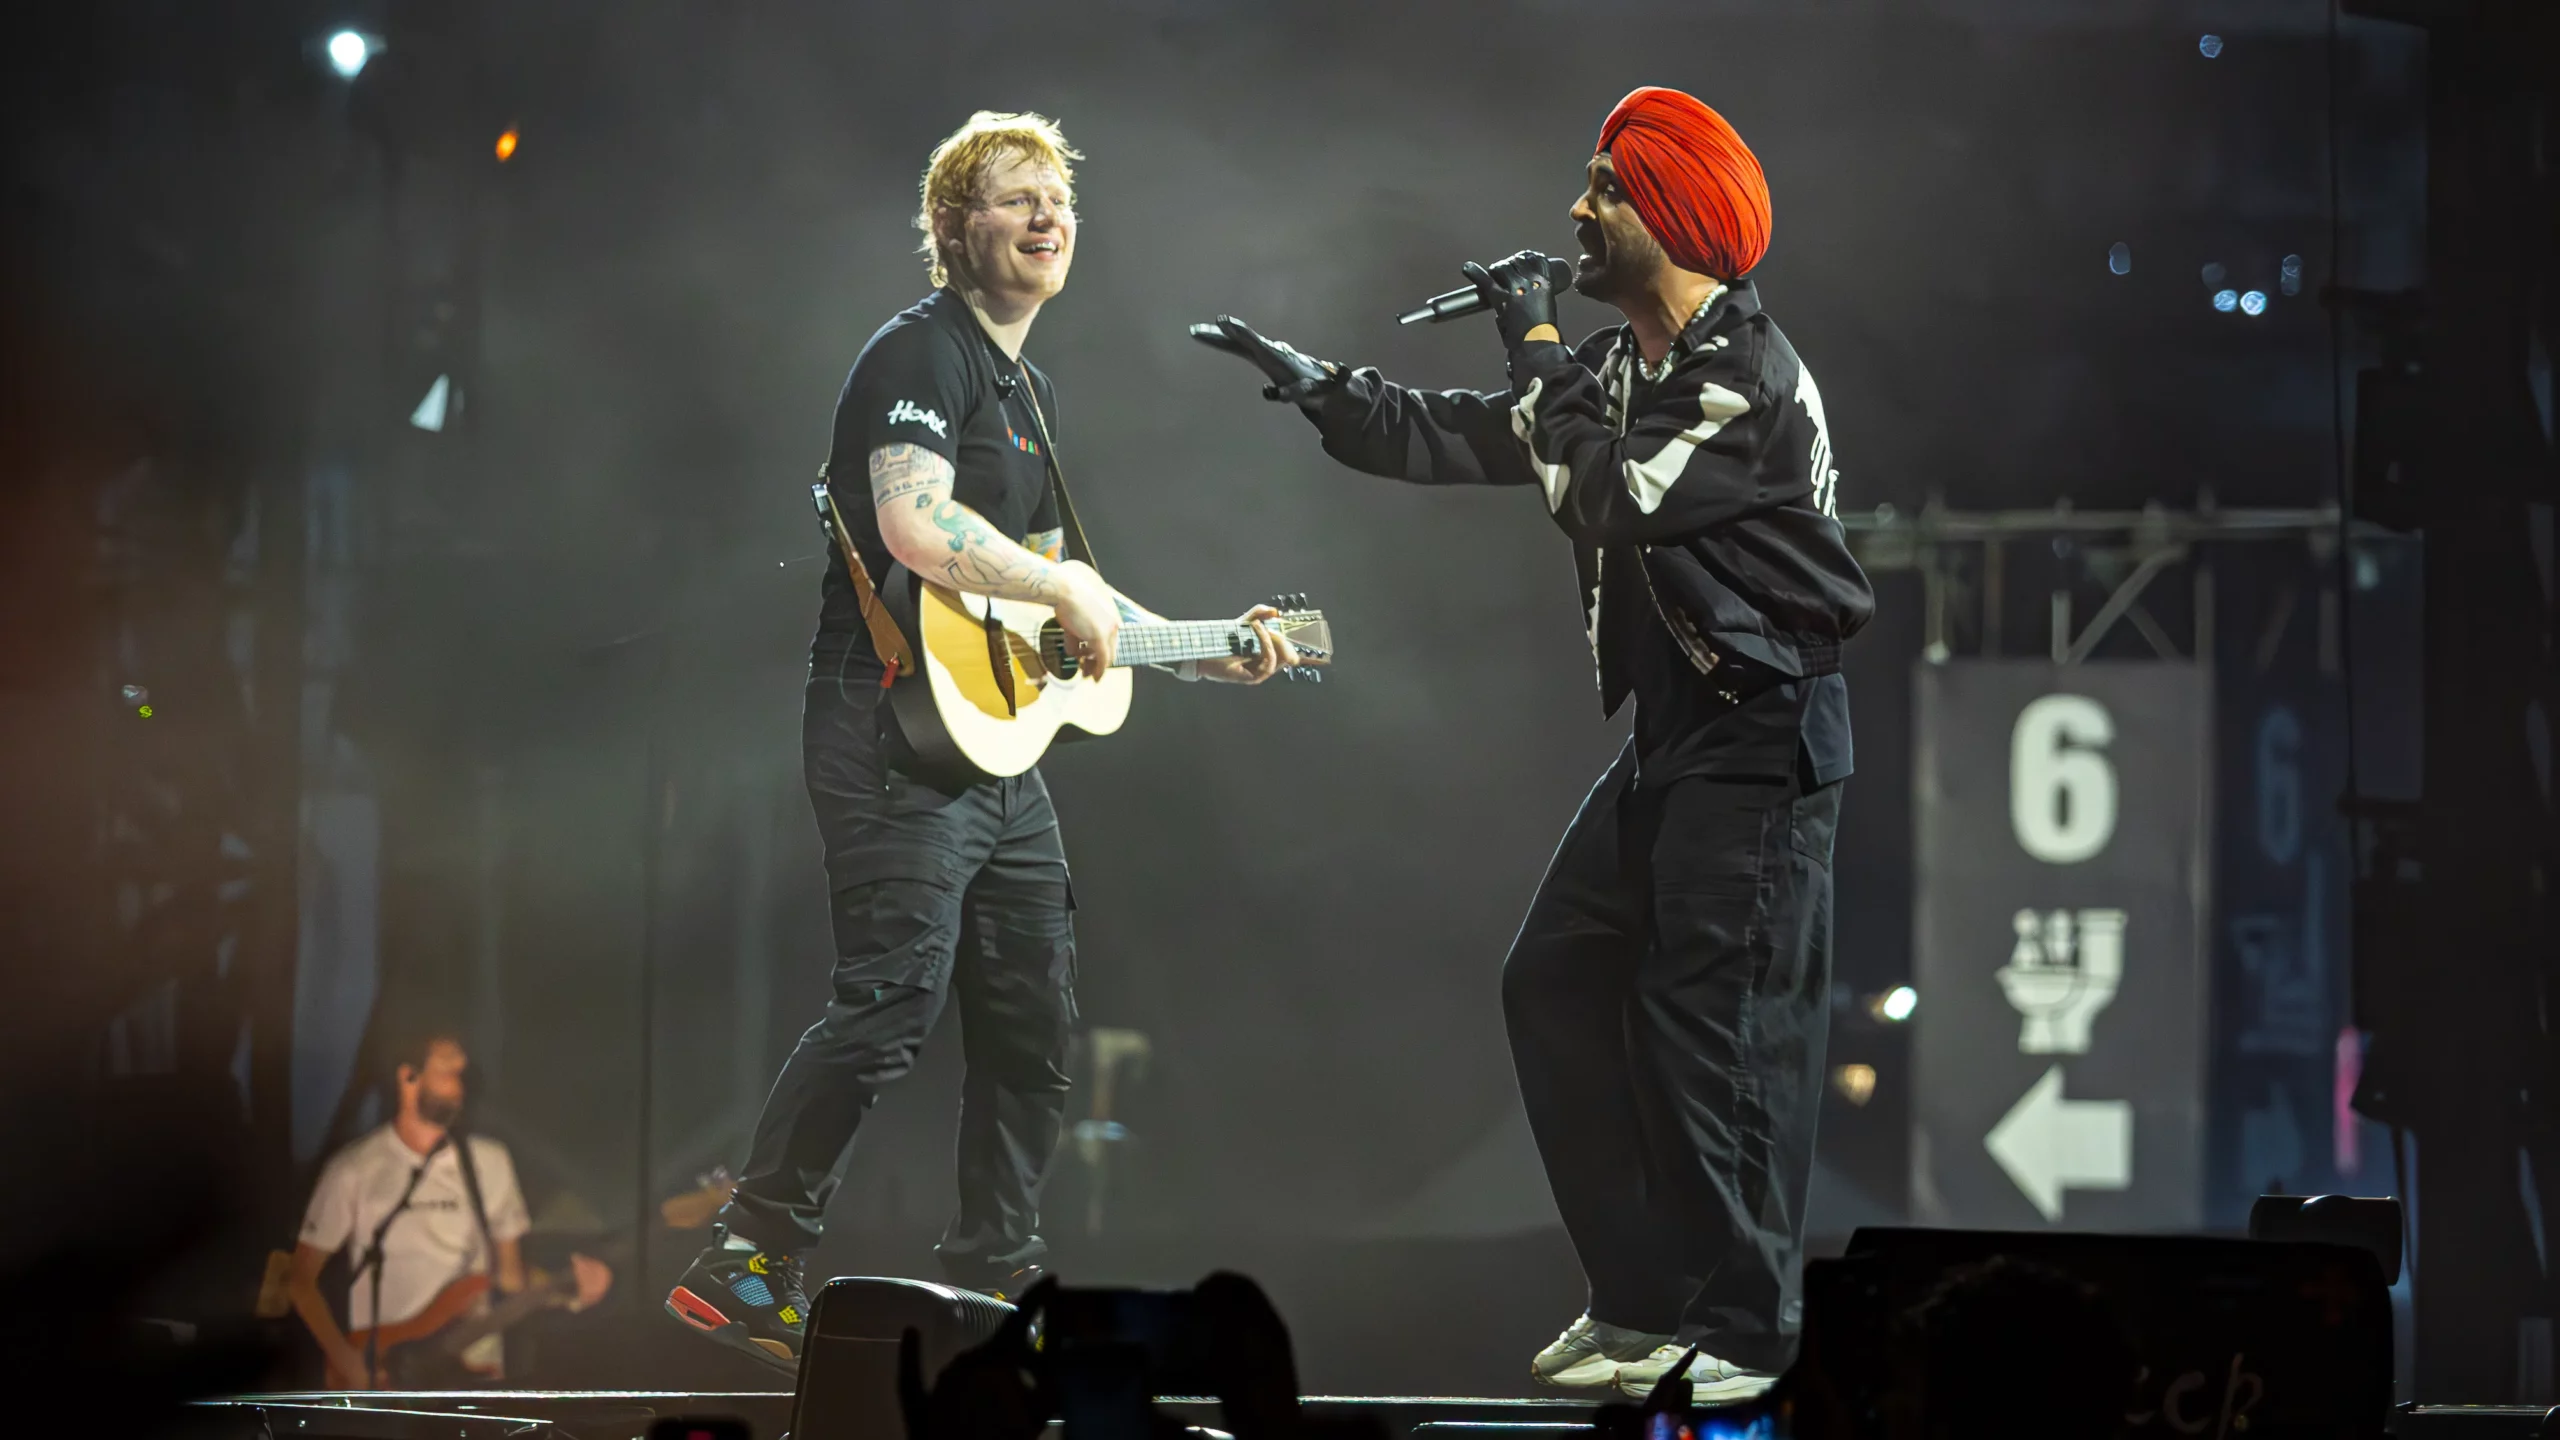 Diljit Dosanjh joins Ed Sheeran in a surprise act sending the crowd in a frenzy at Ed Sheeran ÷ x Tour co promoted by BookMyShow Live RVR16 16212717 scaled